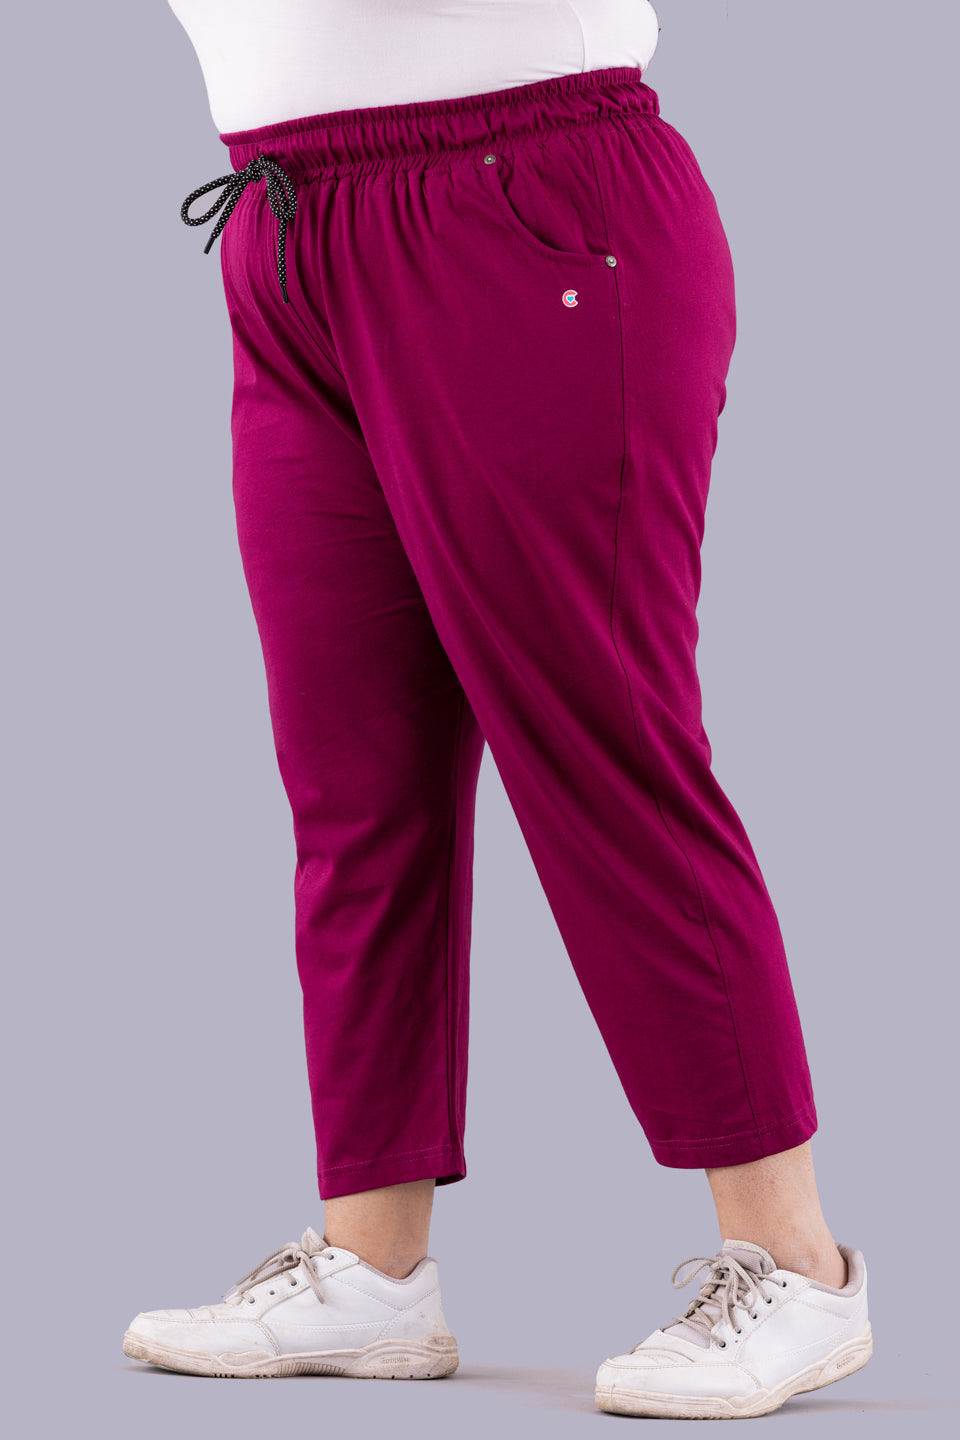 Buy Comfy Purple Half Cotton Capri Pants For Women Online In India By  Cupidclothing's – Cupid Clothings